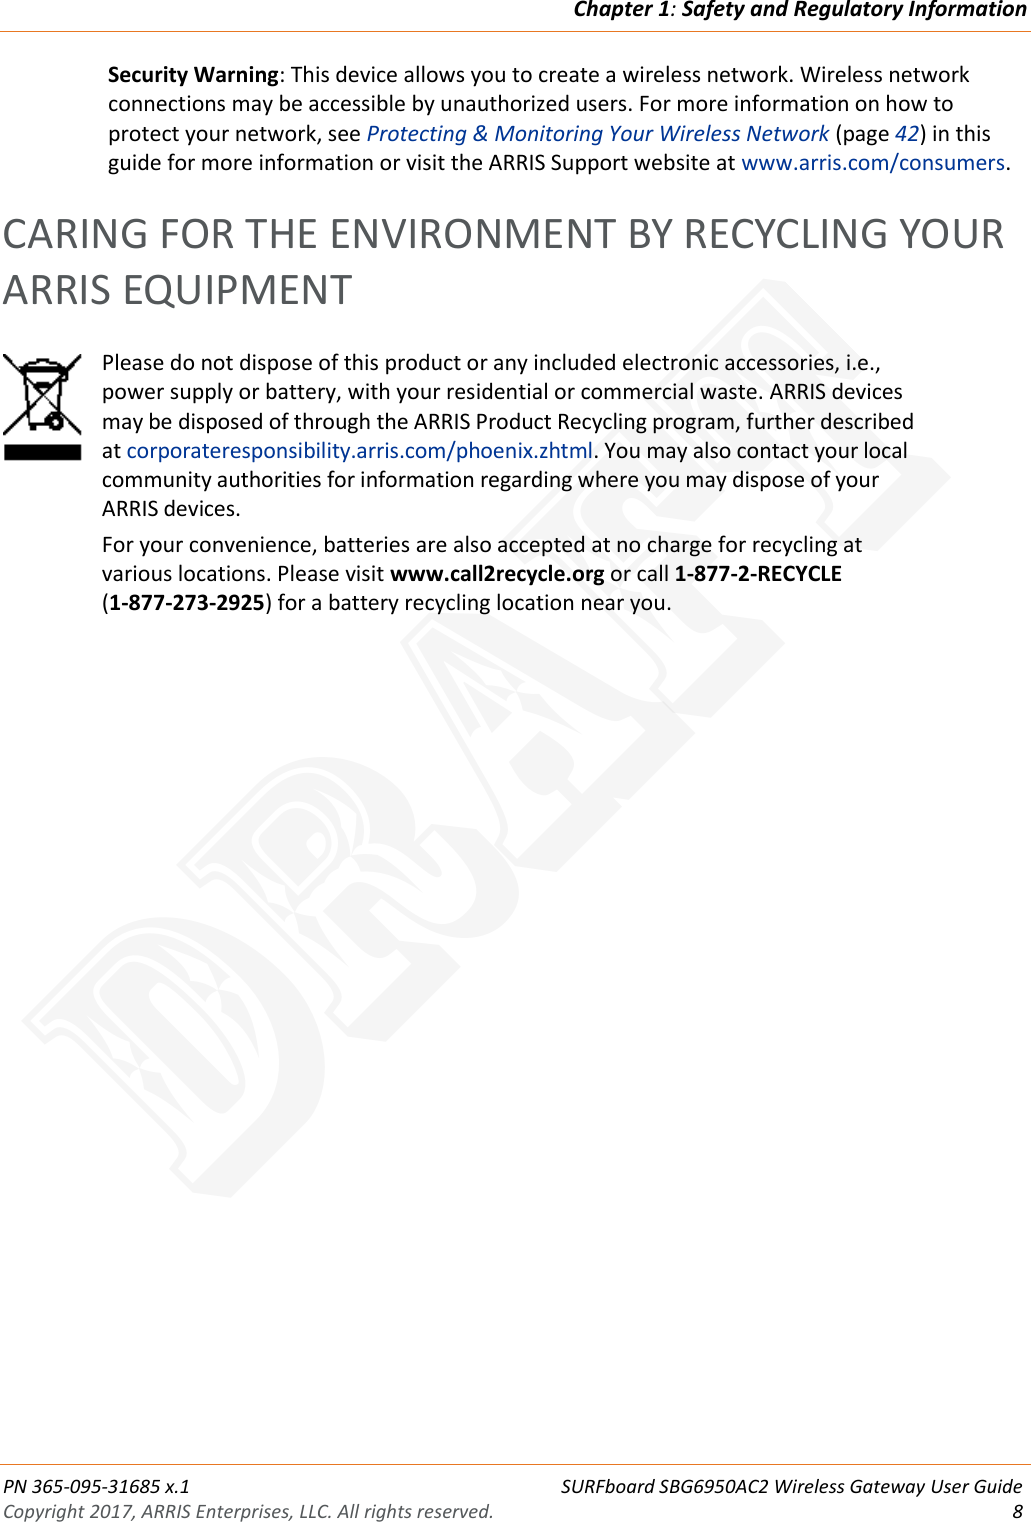 Chapter 1: Safety and Regulatory Information  PN 365-095-31685 x.1 SURFboard SBG6950AC2 Wireless Gateway User Guide Copyright 2017, ARRIS Enterprises, LLC. All rights reserved.  8  Security Warning: This device allows you to create a wireless network. Wireless network connections may be accessible by unauthorized users. For more information on how to protect your network, see Protecting &amp; Monitoring Your Wireless Network (page 42) in this guide for more information or visit the ARRIS Support website at www.arris.com/consumers.   CARING FOR THE ENVIRONMENT BY RECYCLING YOUR ARRIS EQUIPMENT  Please do not dispose of this product or any included electronic accessories, i.e., power supply or battery, with your residential or commercial waste. ARRIS devices may be disposed of through the ARRIS Product Recycling program, further described at corporateresponsibility.arris.com/phoenix.zhtml. You may also contact your local community authorities for information regarding where you may dispose of your ARRIS devices. For your convenience, batteries are also accepted at no charge for recycling at various locations. Please visit www.call2recycle.org or call 1-877-2-RECYCLE  (1-877-273-2925) for a battery recycling location near you.  DRAFT